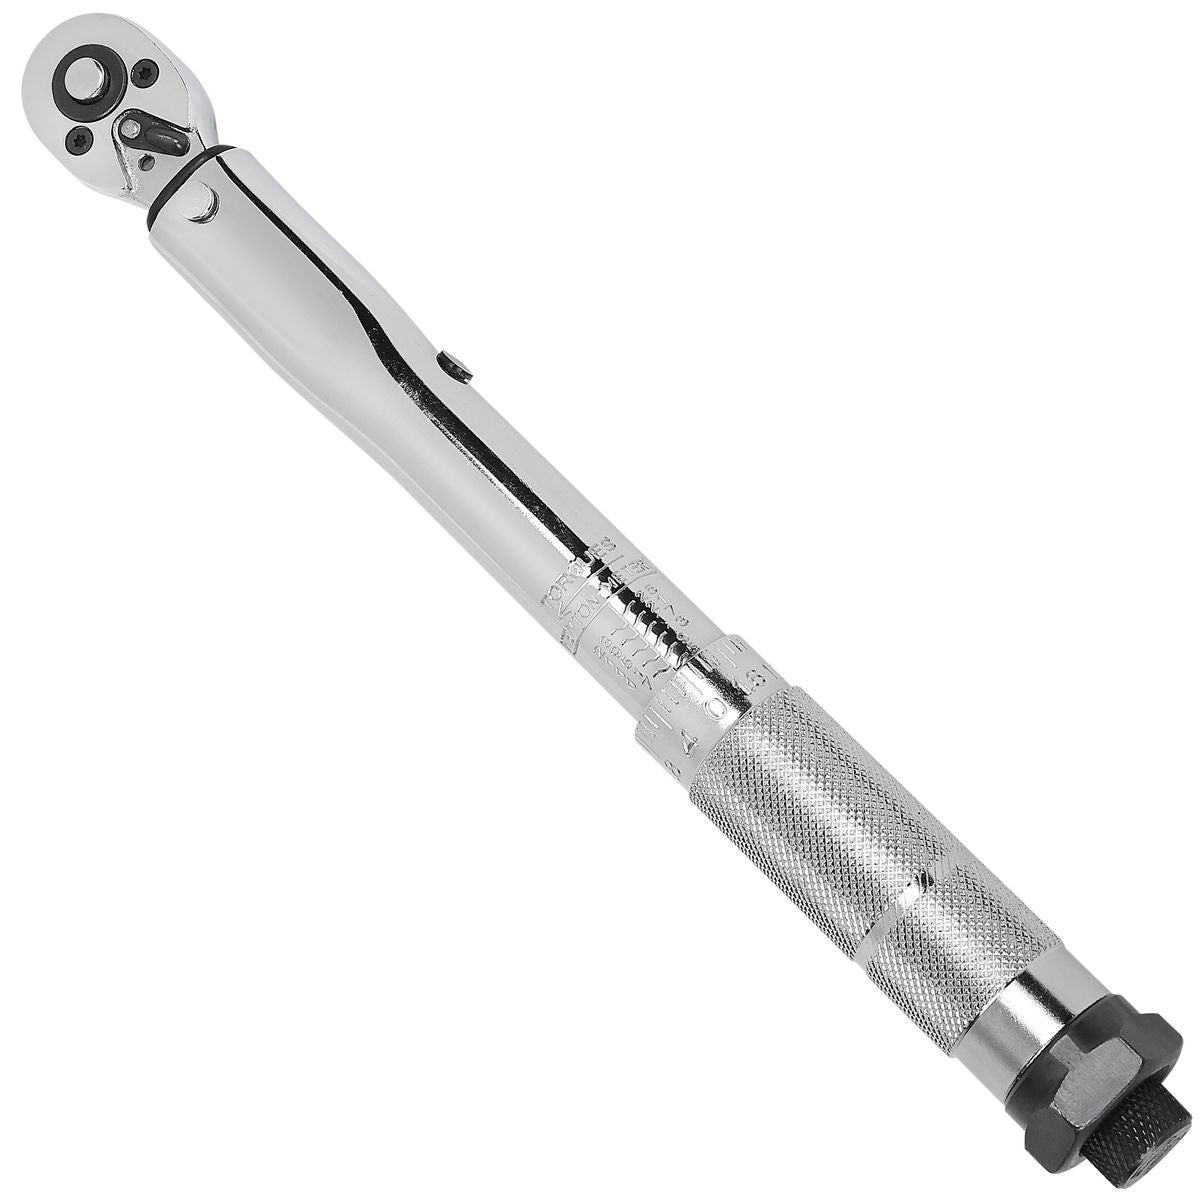 Mechpro Torque Wrench 42-210Nm 1/2in Drive with Sockets - MPW107 - Mechpro  Tools